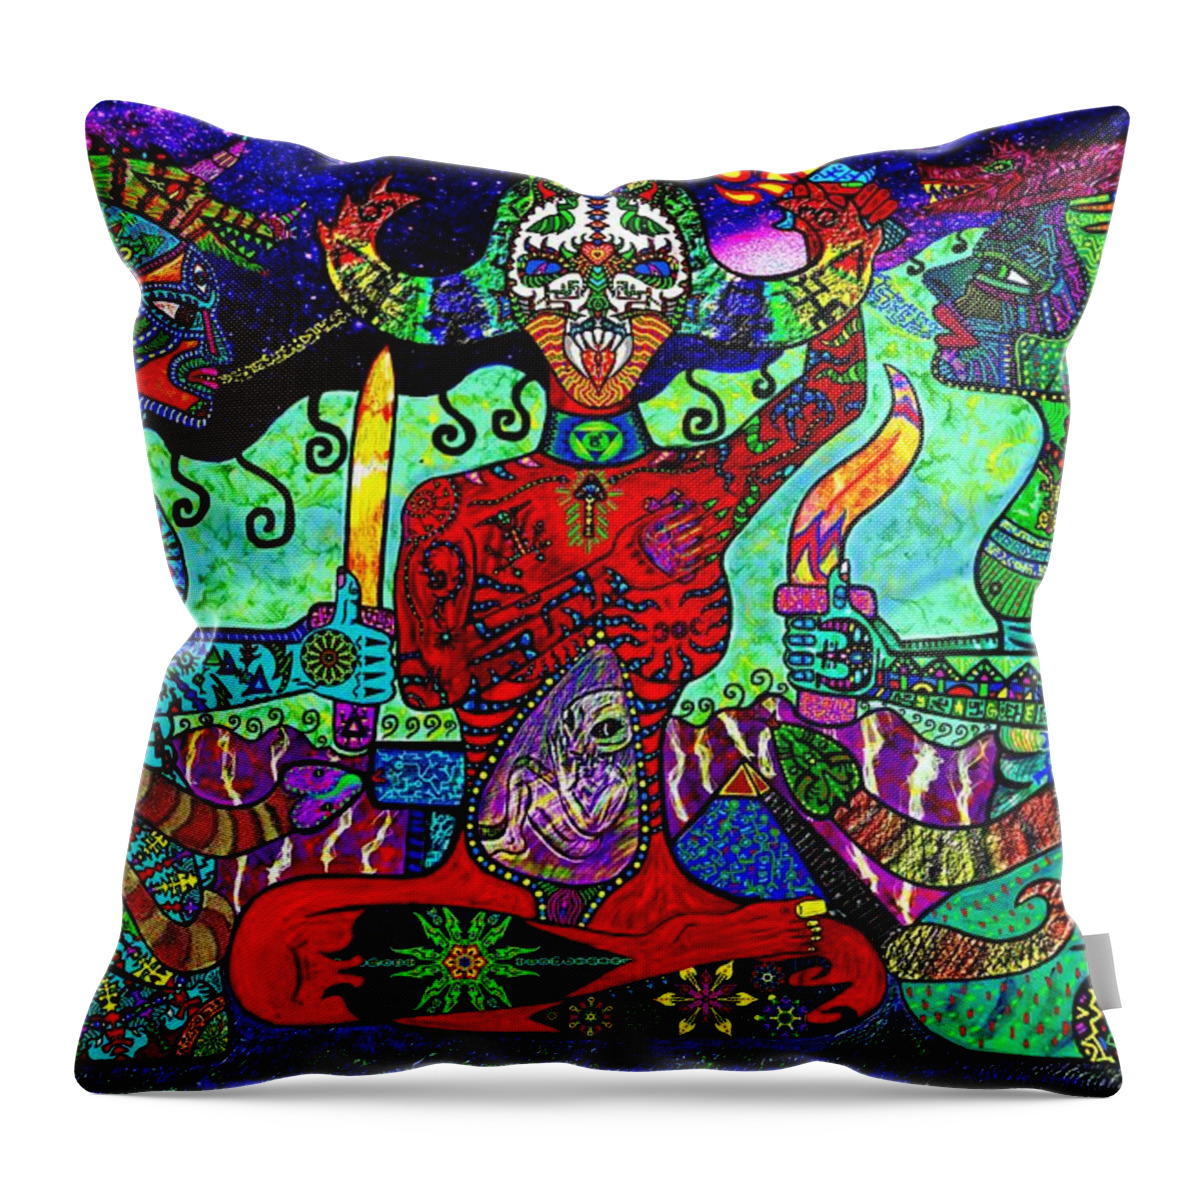 Visionary Art Throw Pillow featuring the mixed media Theosophist Telepathic Trinity by Myztico Campo